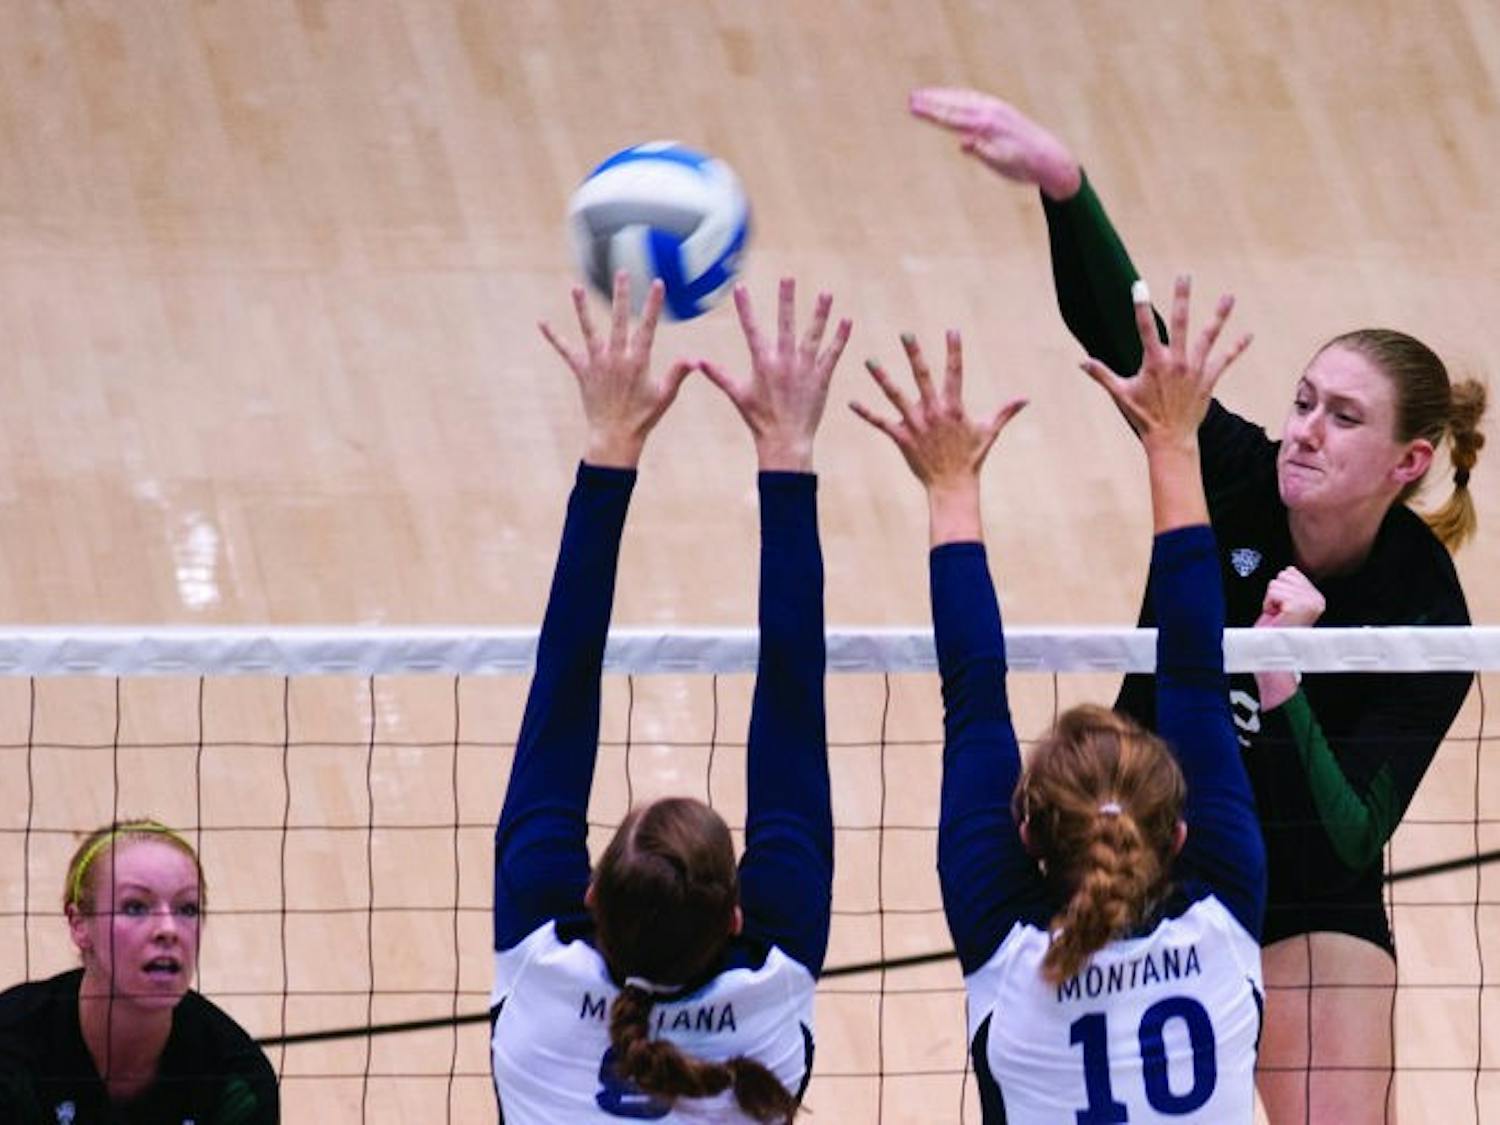 Volleyball: Ohio splits conference matches, sweeps rival Miami for 6th time  